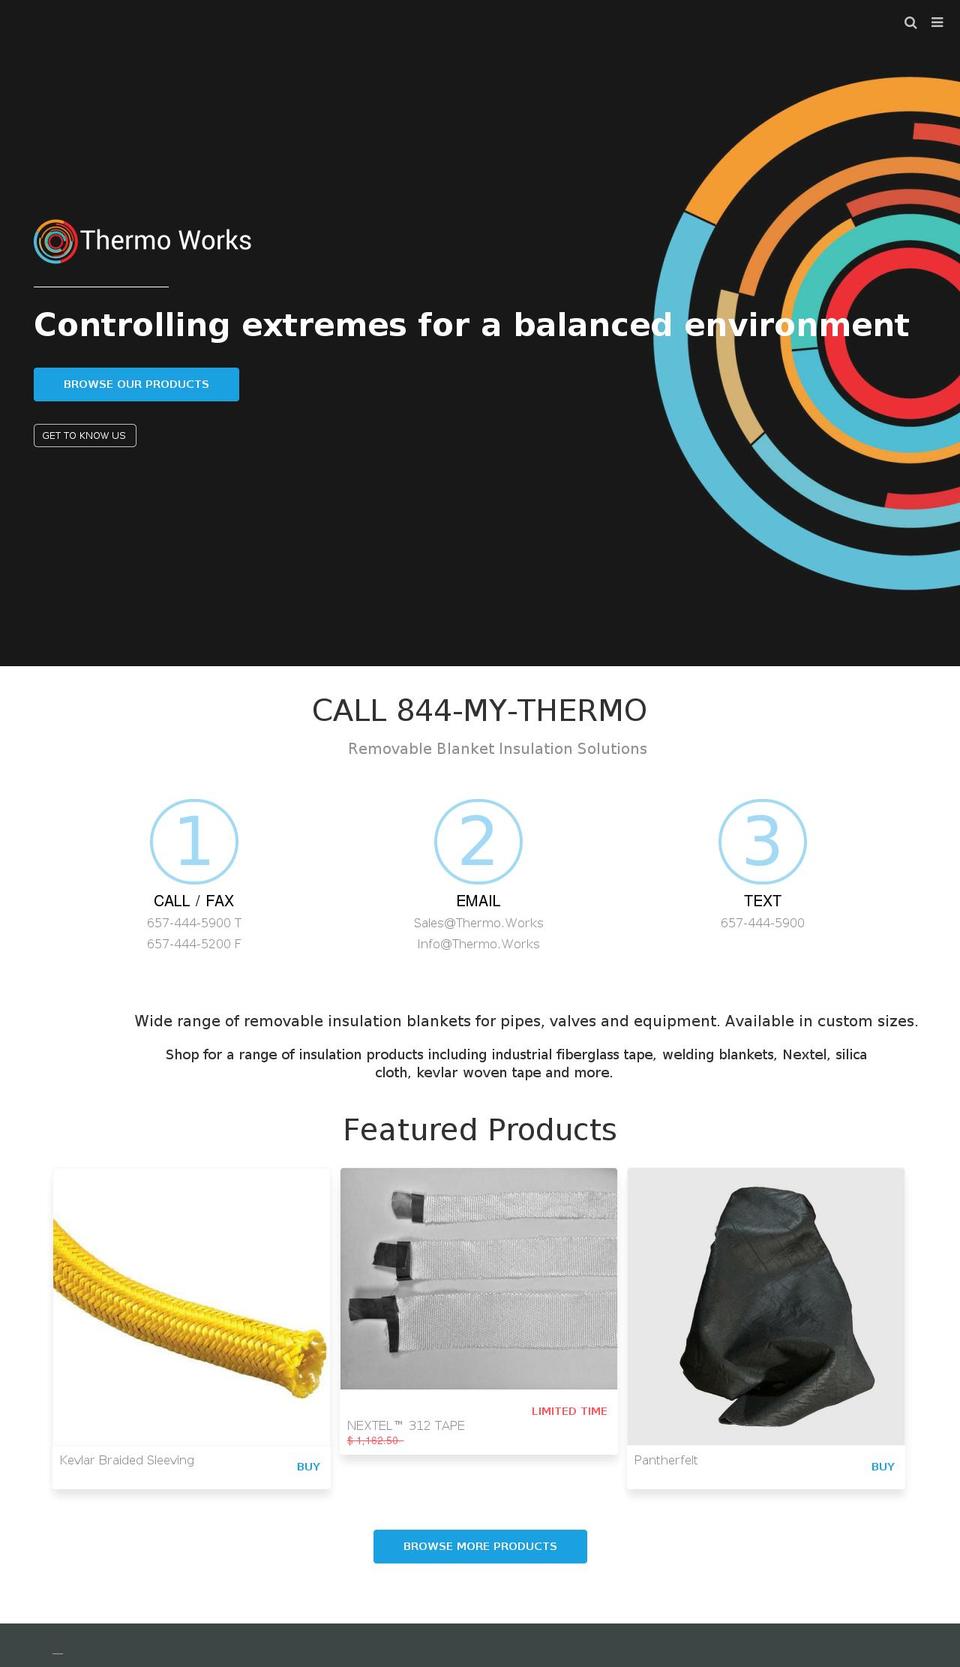 thermoworks.us shopify website screenshot